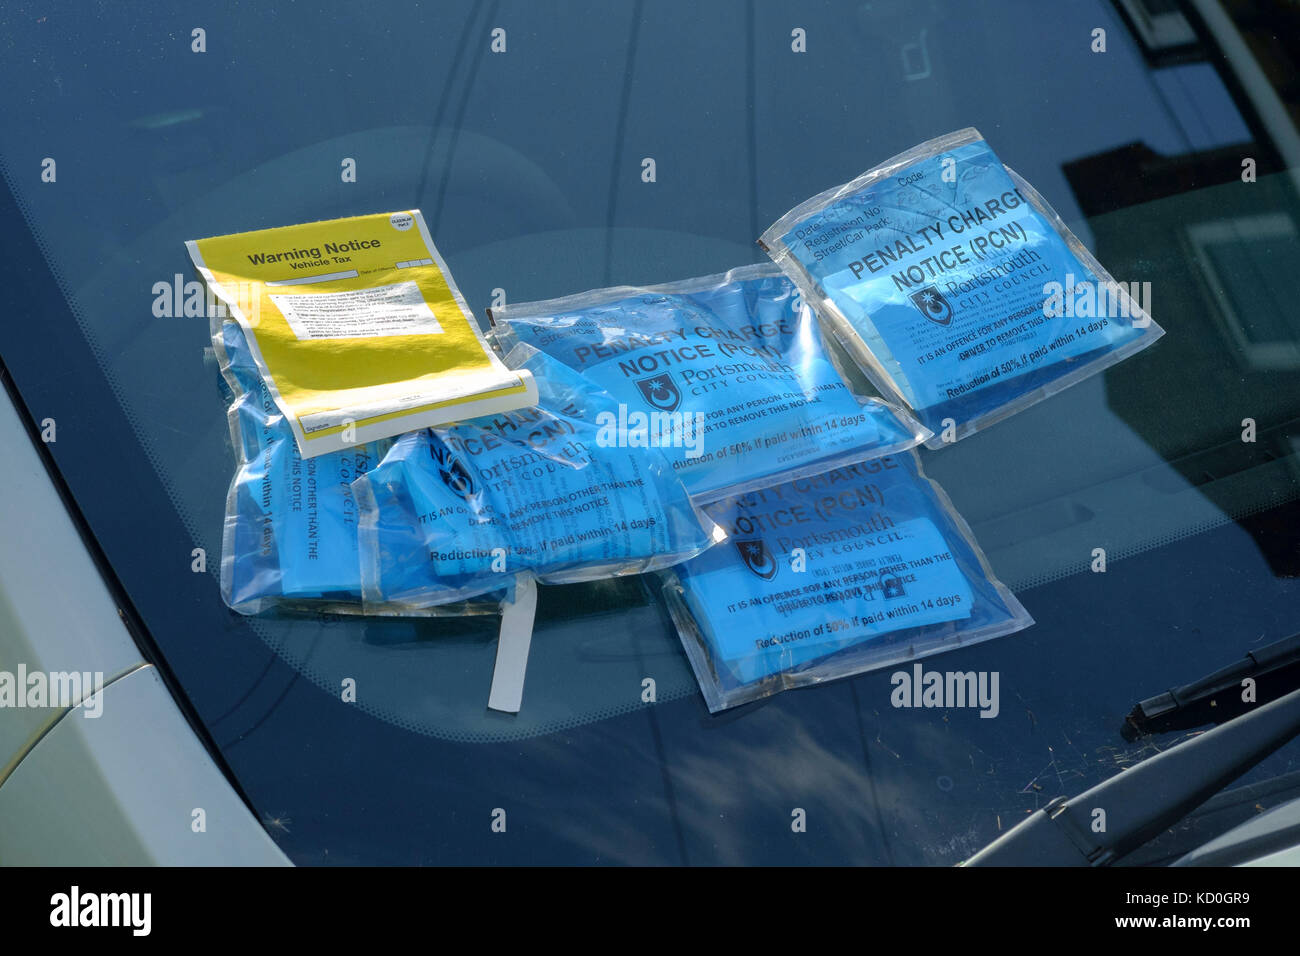 a car windscreen covered with multiple parking tickets and penalty notices england uk Stock Photo